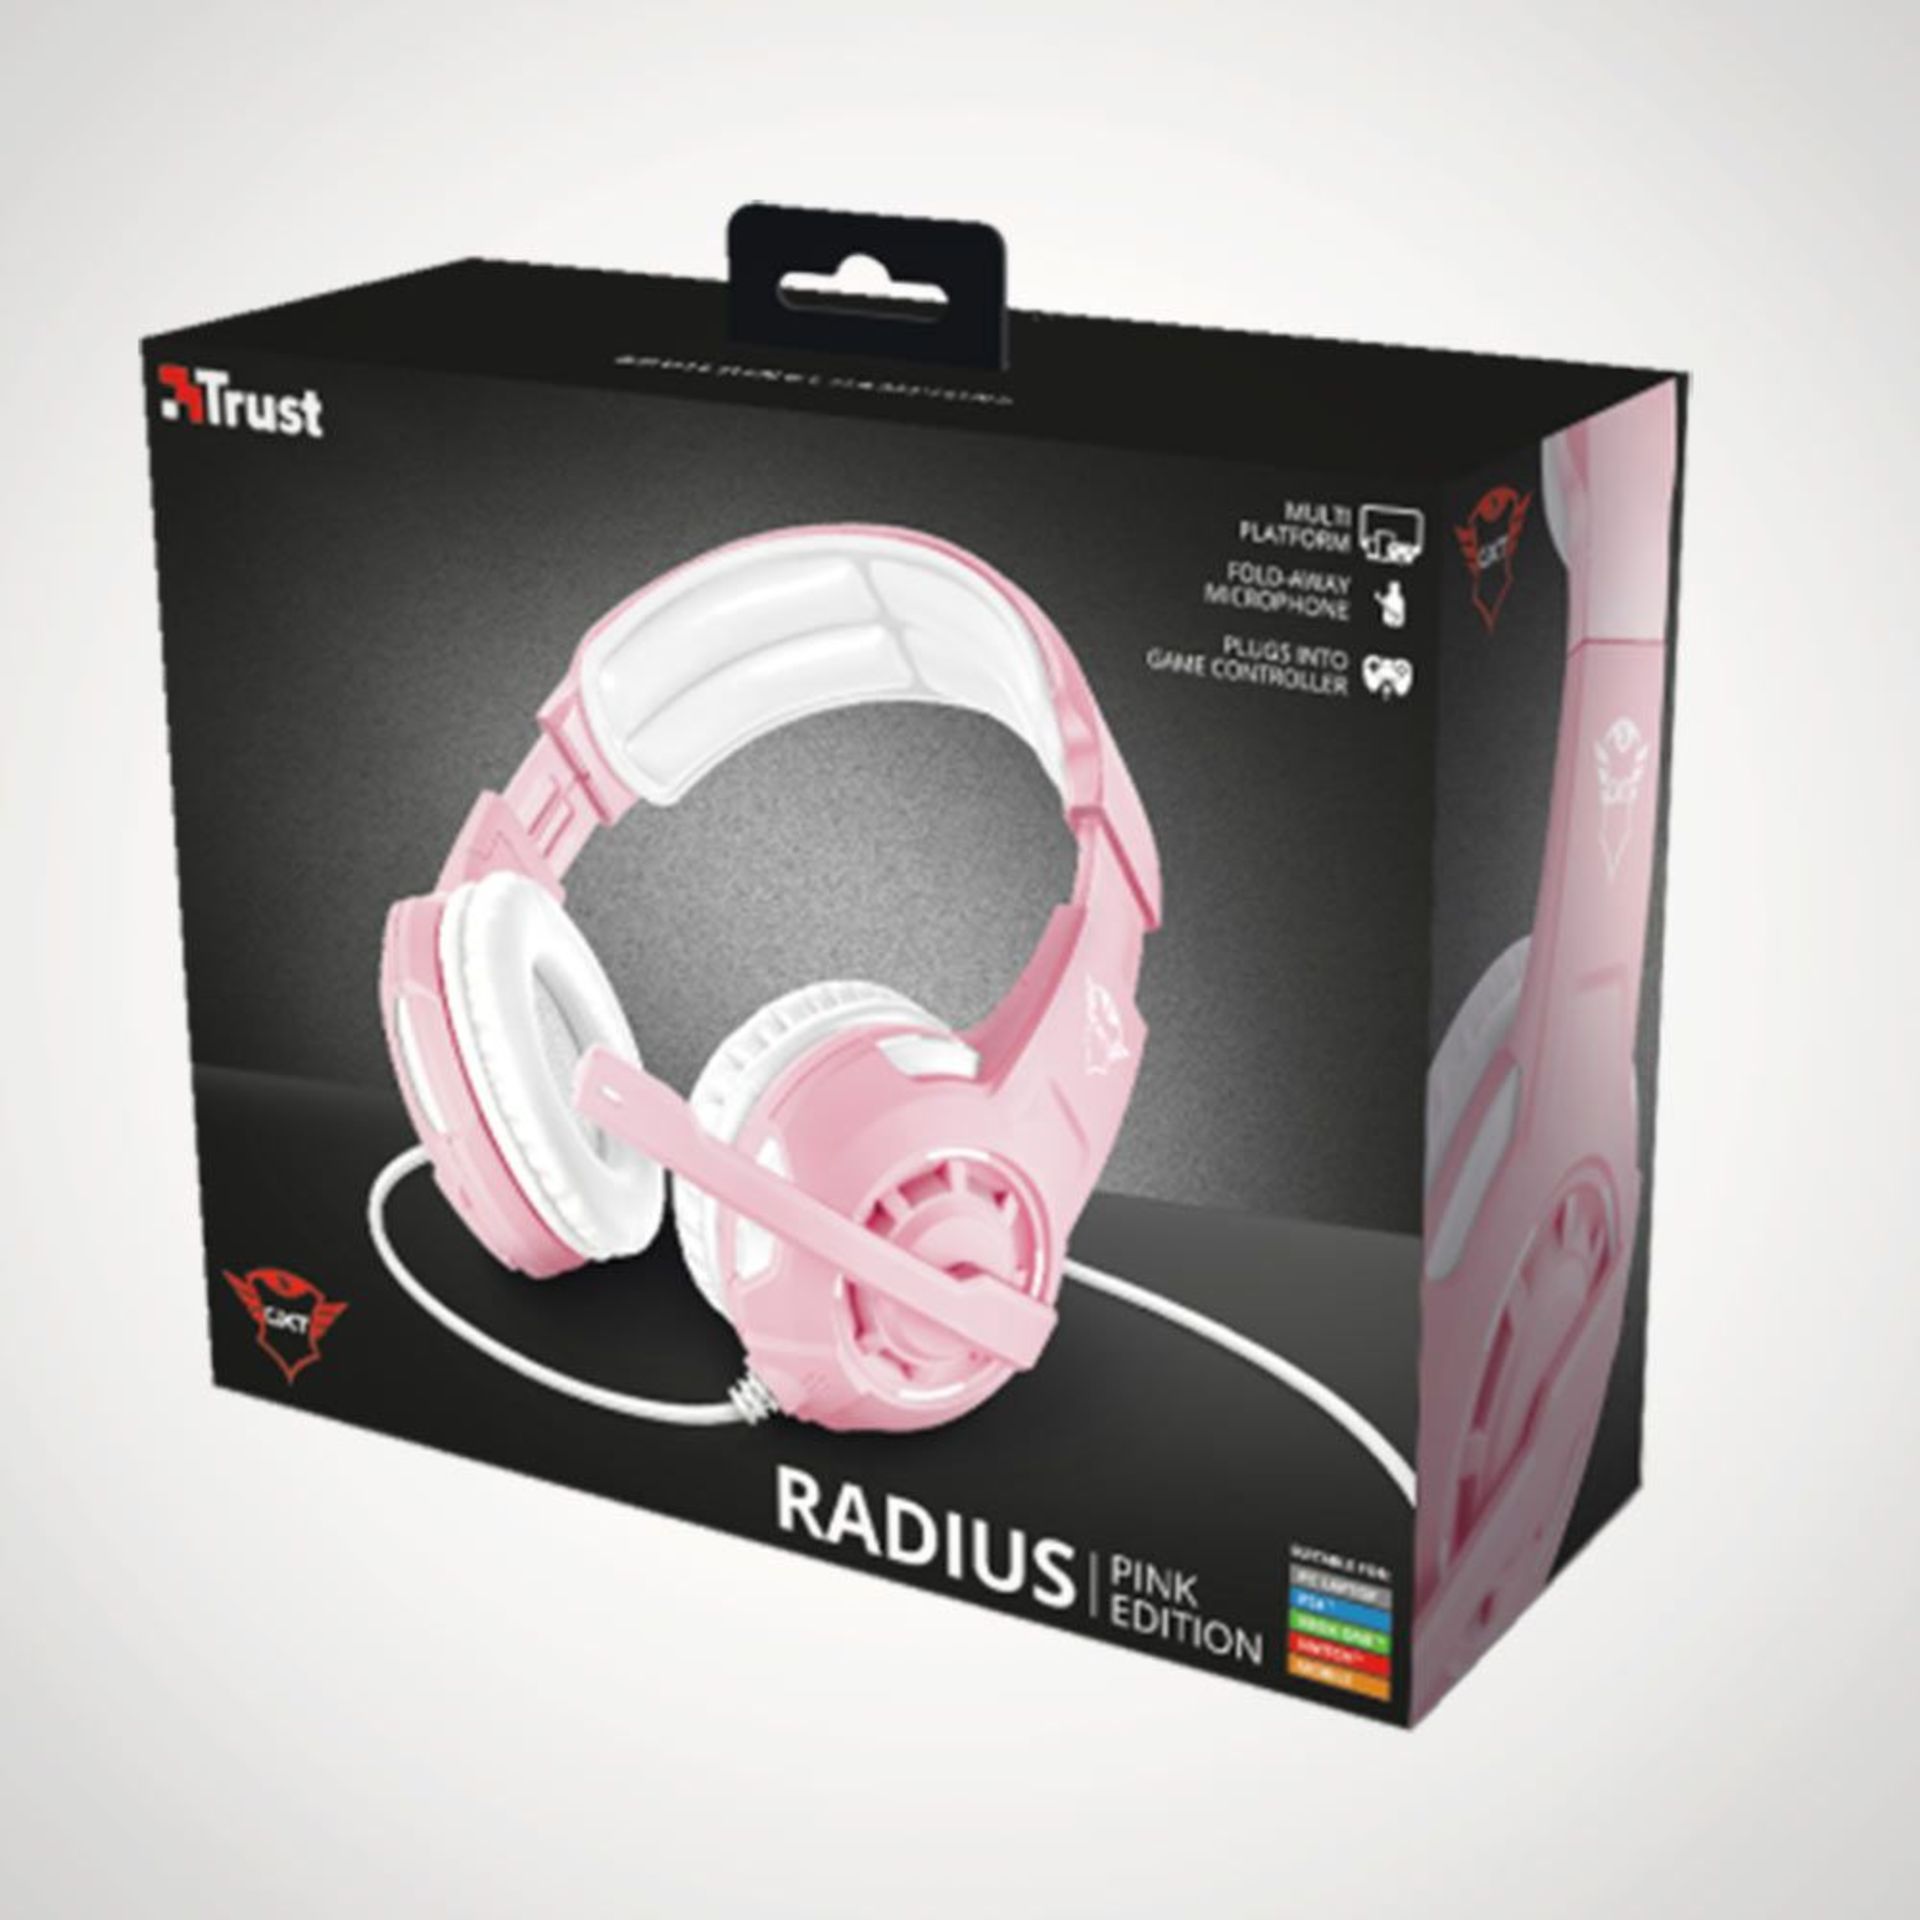 (P2) 5x Trust GXT Radius Pink Edition Gaming Headset RRP £19.99 Each. (Units Have Return To Manufa - Image 2 of 3